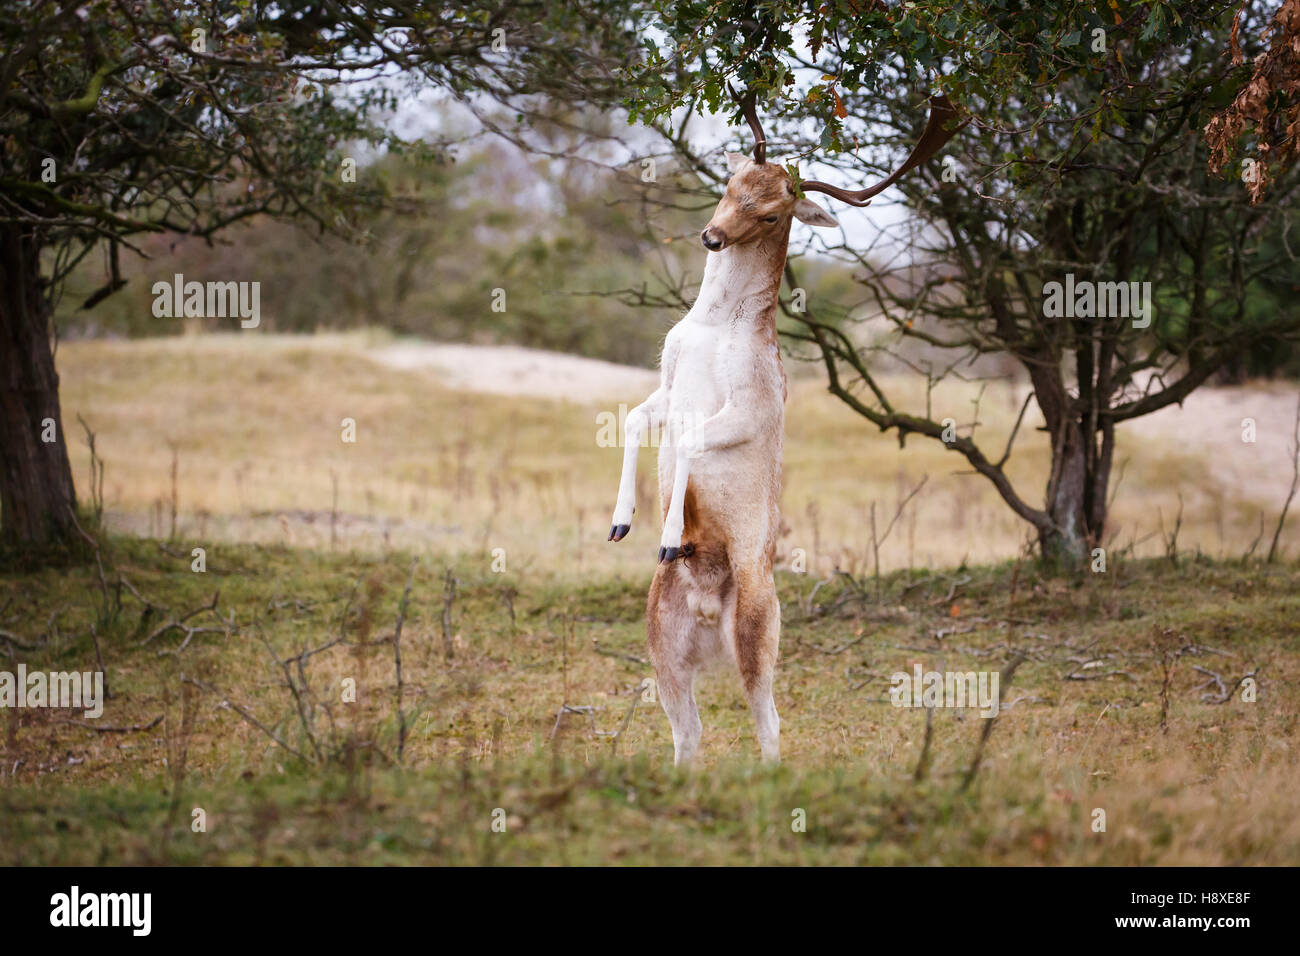 fallow deer eating from a tree Stock Photo